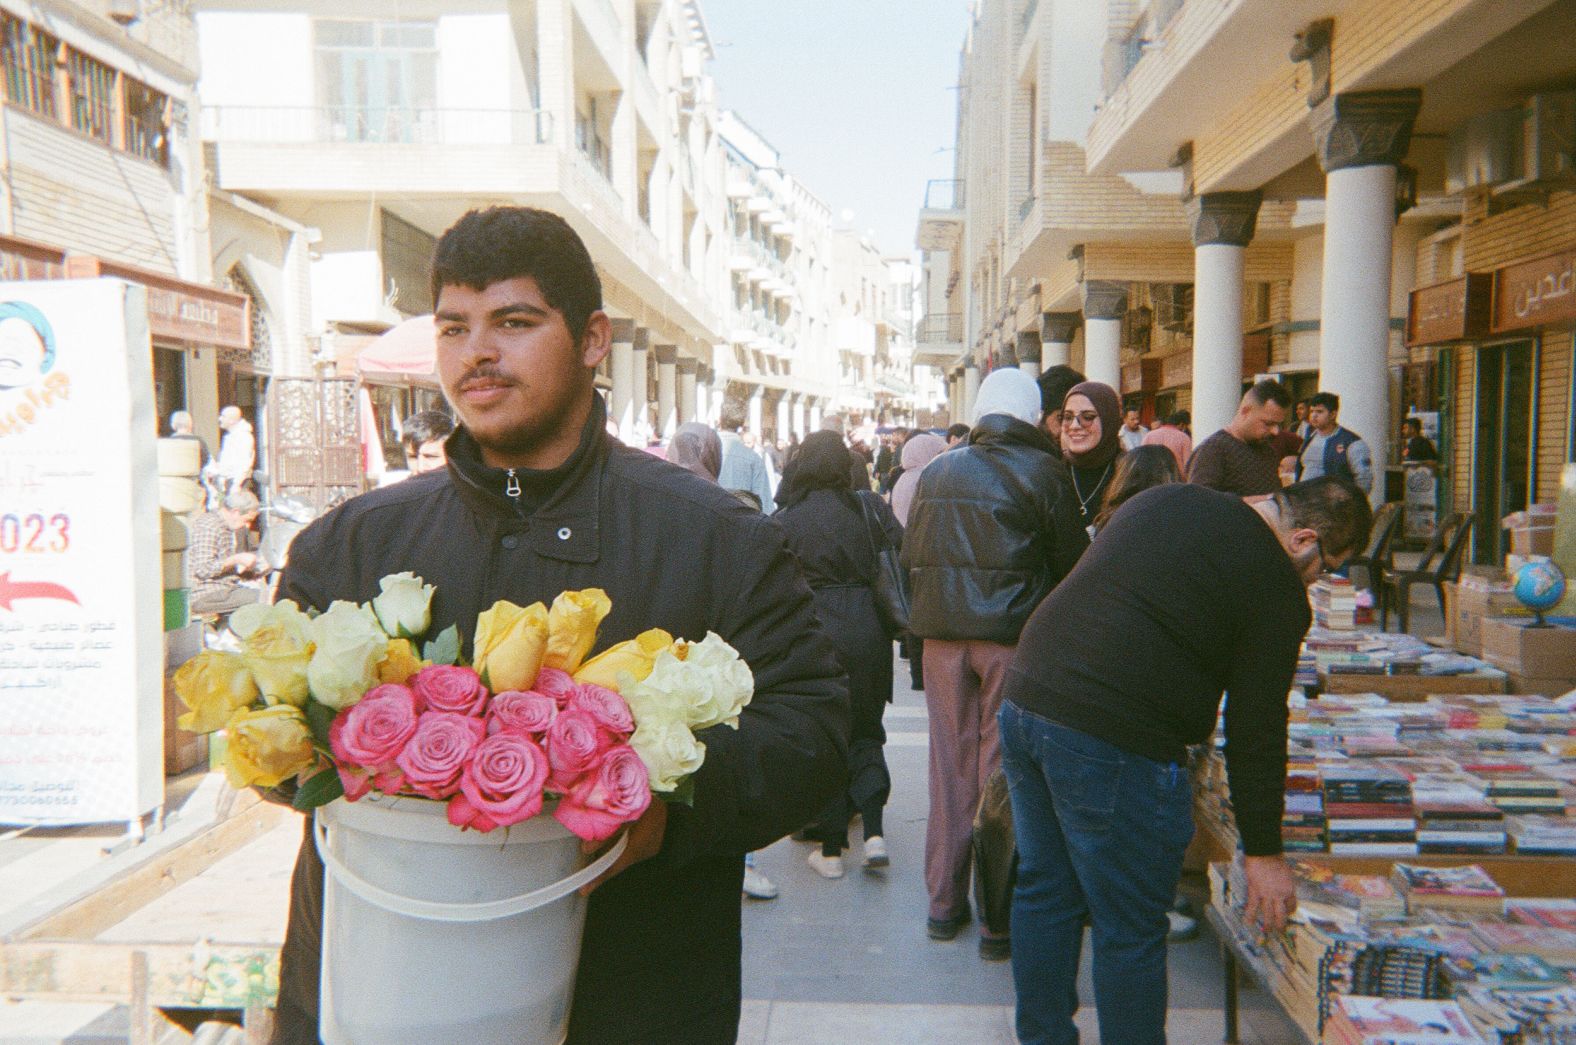 A man carries roses through al-Mutanabbi Street in central Baghdad in this photo taken by Salam Karim, a 30-year-old digital marketing freelancer who manages social media pages.